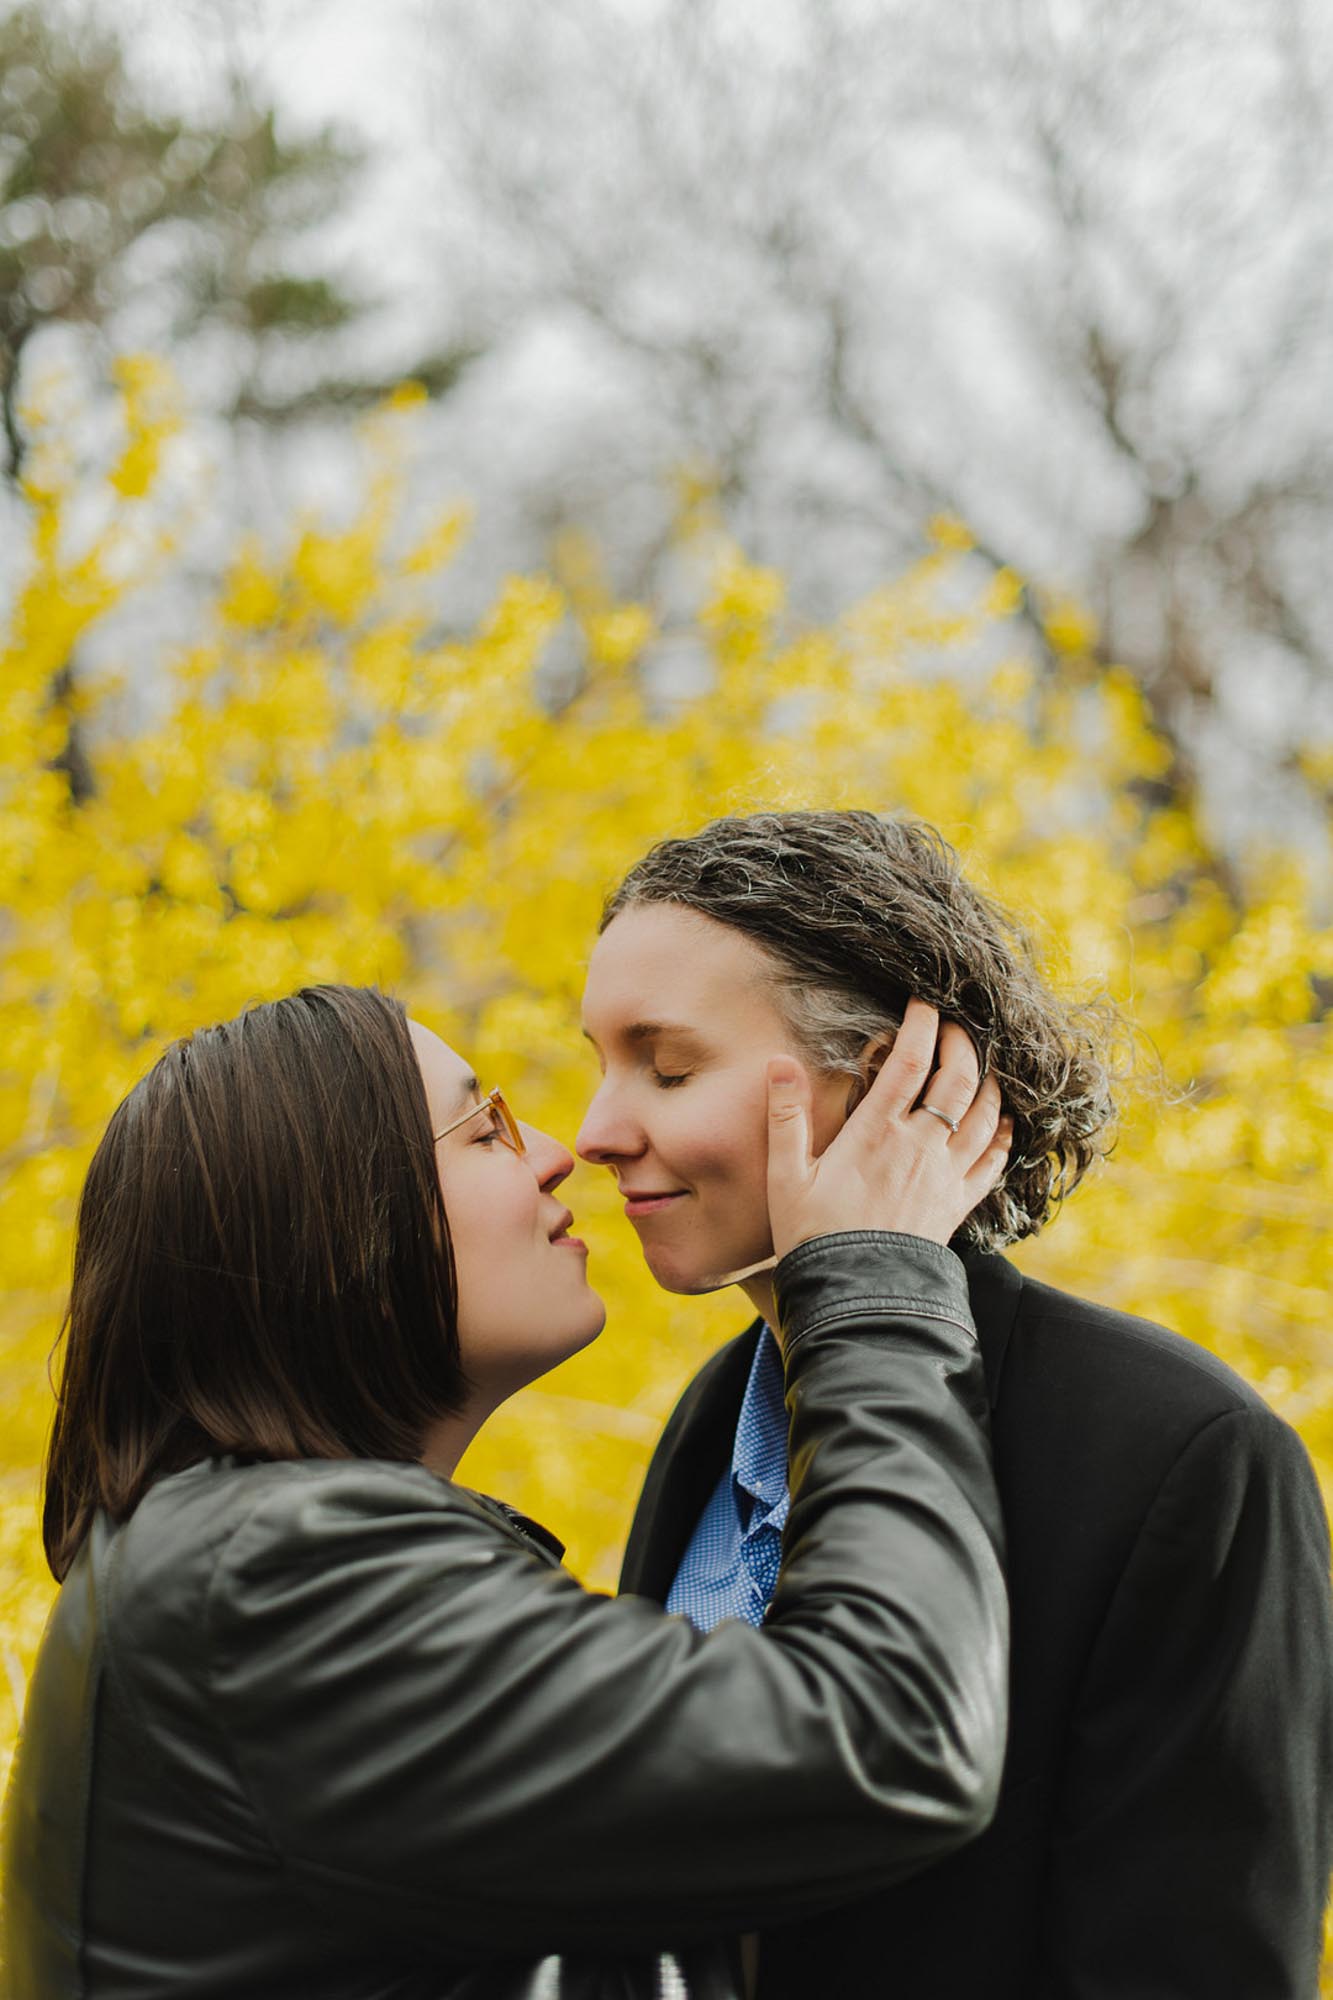 Joyous state park engagement session after ring pop proposal | Amanda Macchia Photography | Featured on Equally Wed, the leading LGBTQ+ wedding magazine